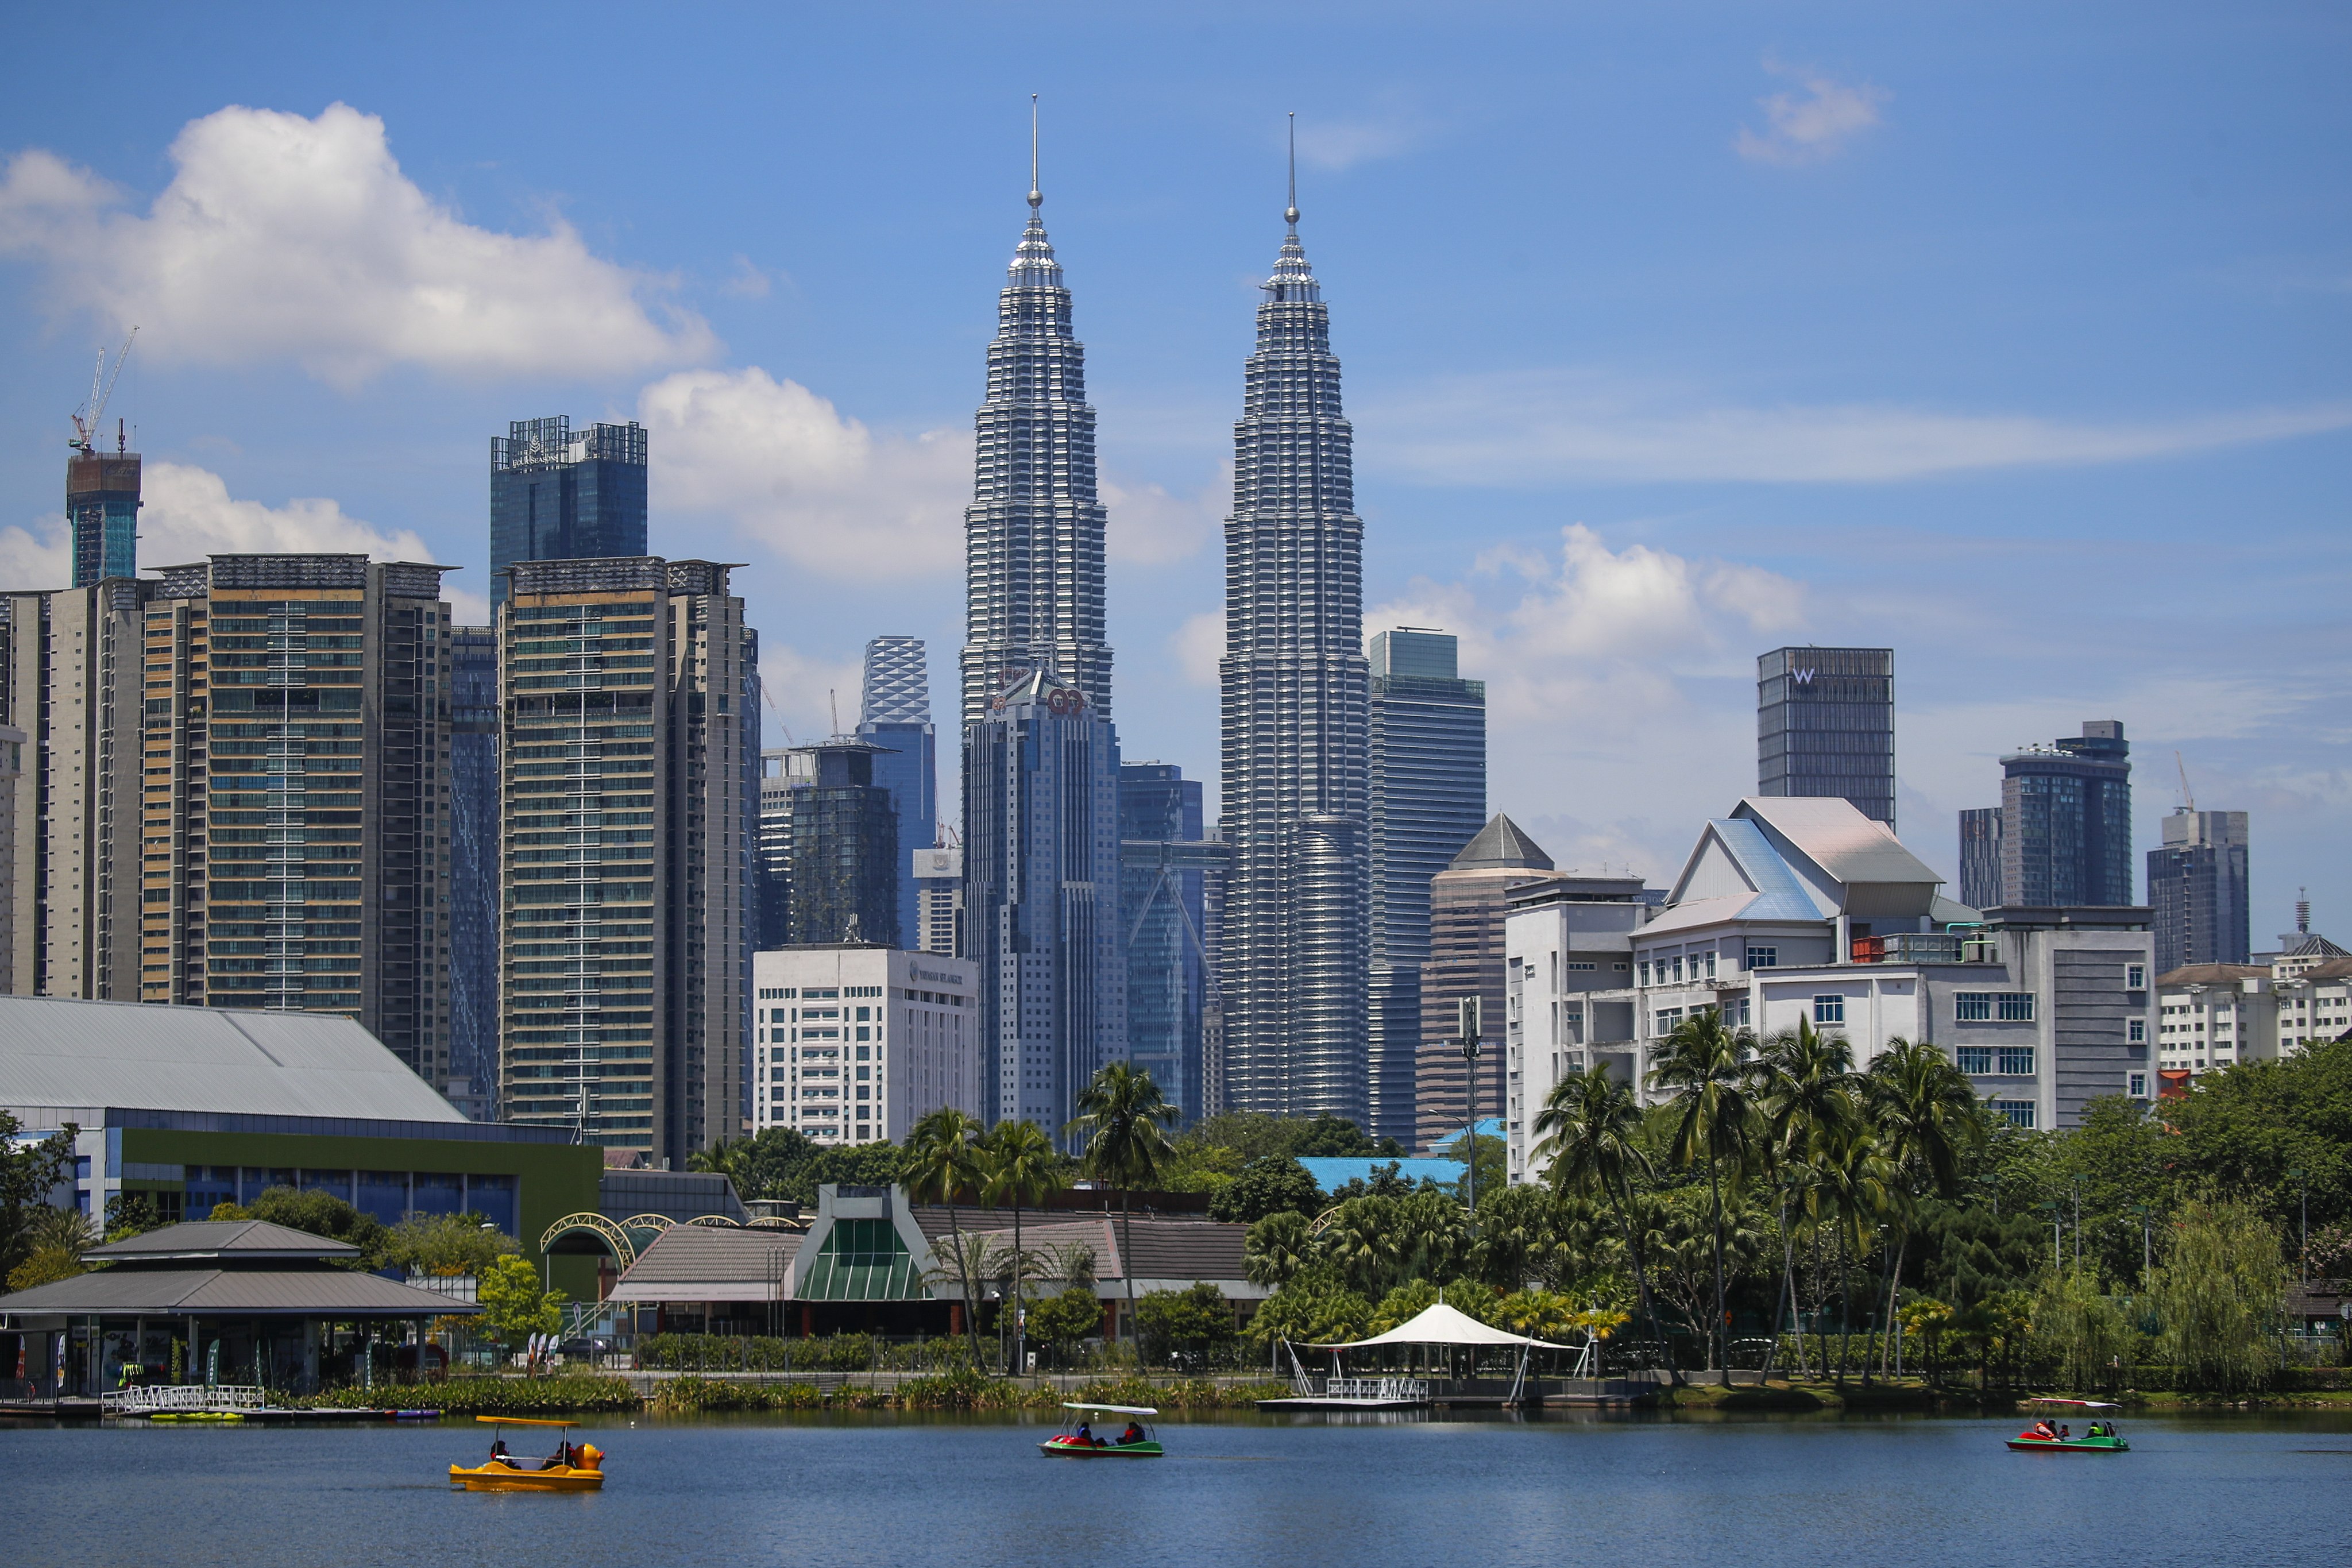 A general view of the Petronas Twin Towers in Kuala Lumpur. A 37-year-old man accused of stalking a woman over eight years across continents on Thursday became the first person to be charged under Malaysia’s new anti-stalking law. Photo: EPA-EFE